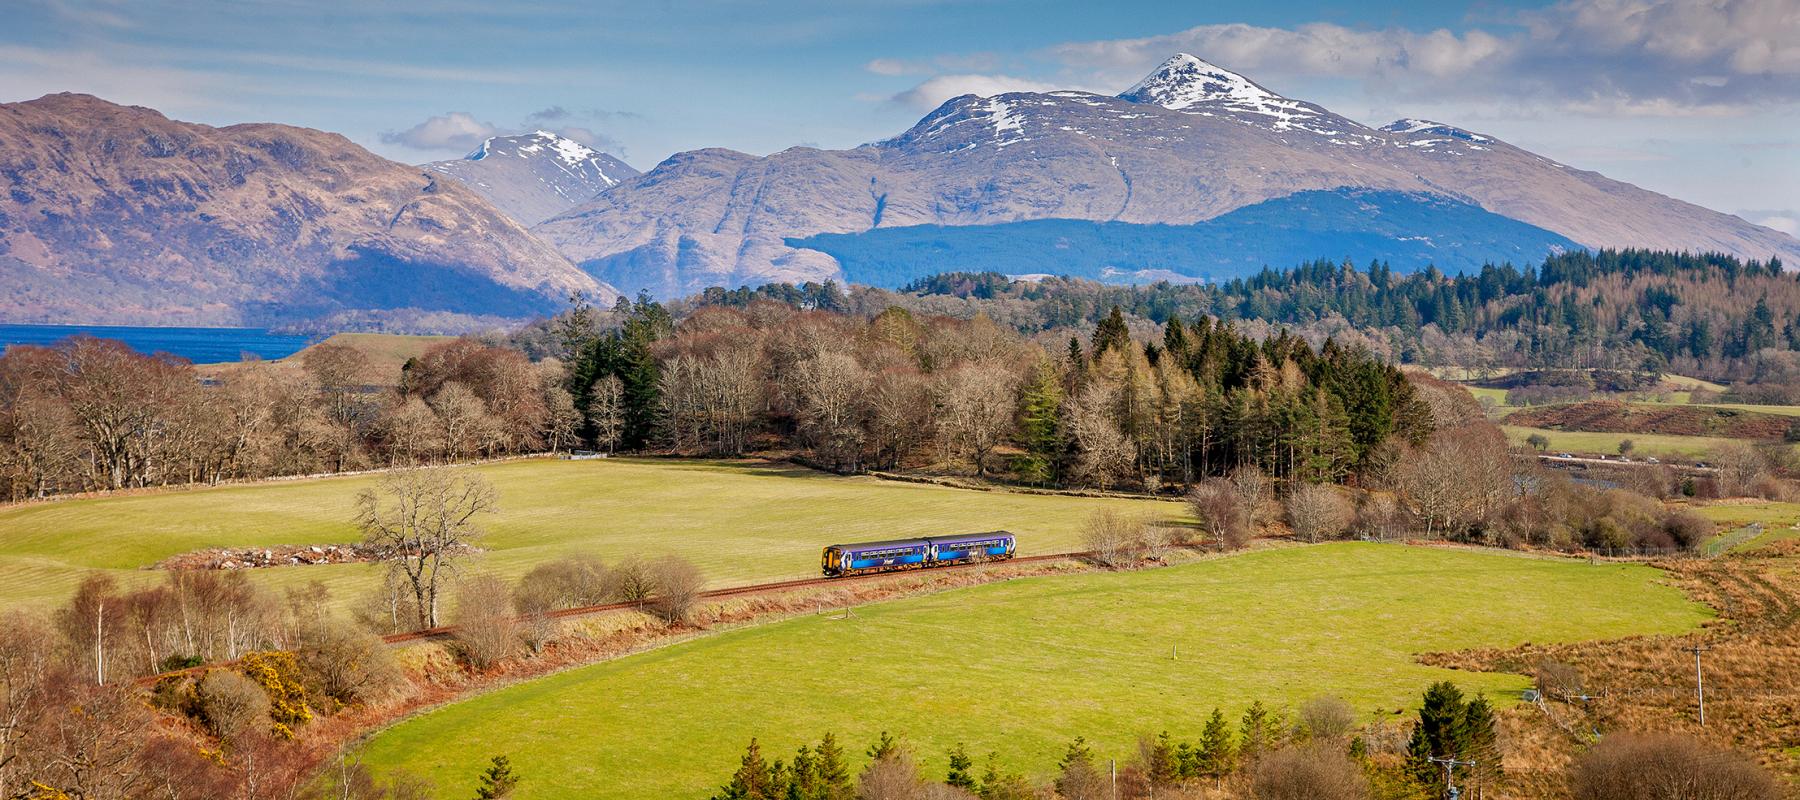 Train on the West Highland Line with mountains in the background